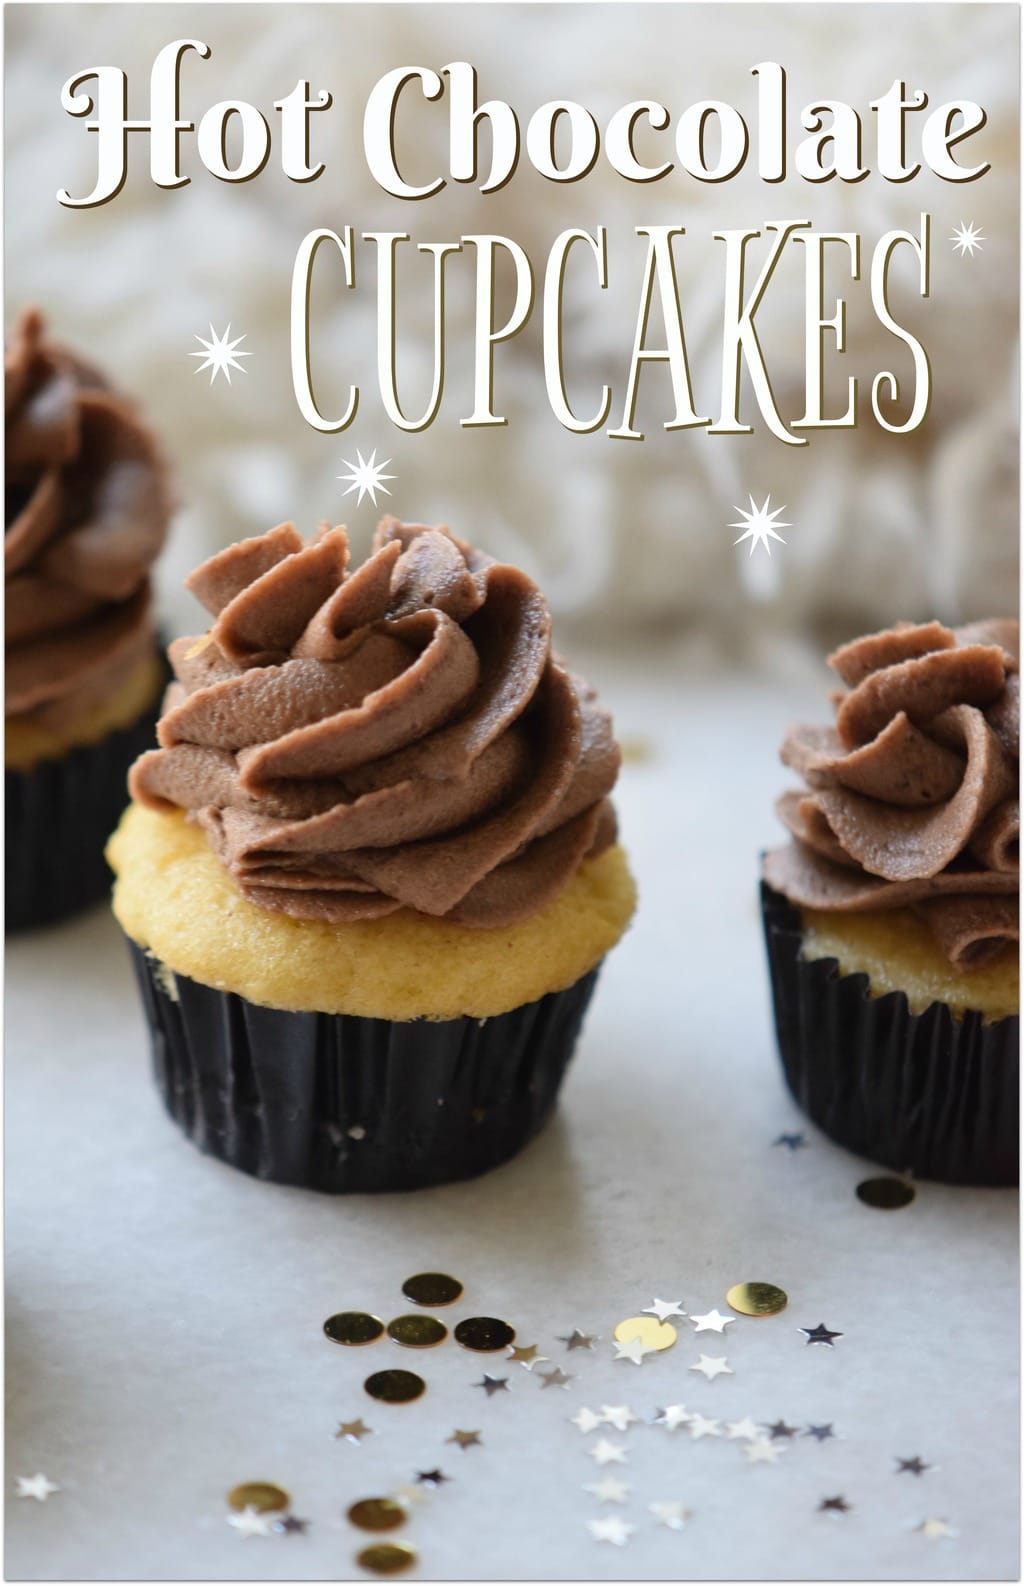 The Best Hot Chocolate Cupcakes You’ll Ever Taste